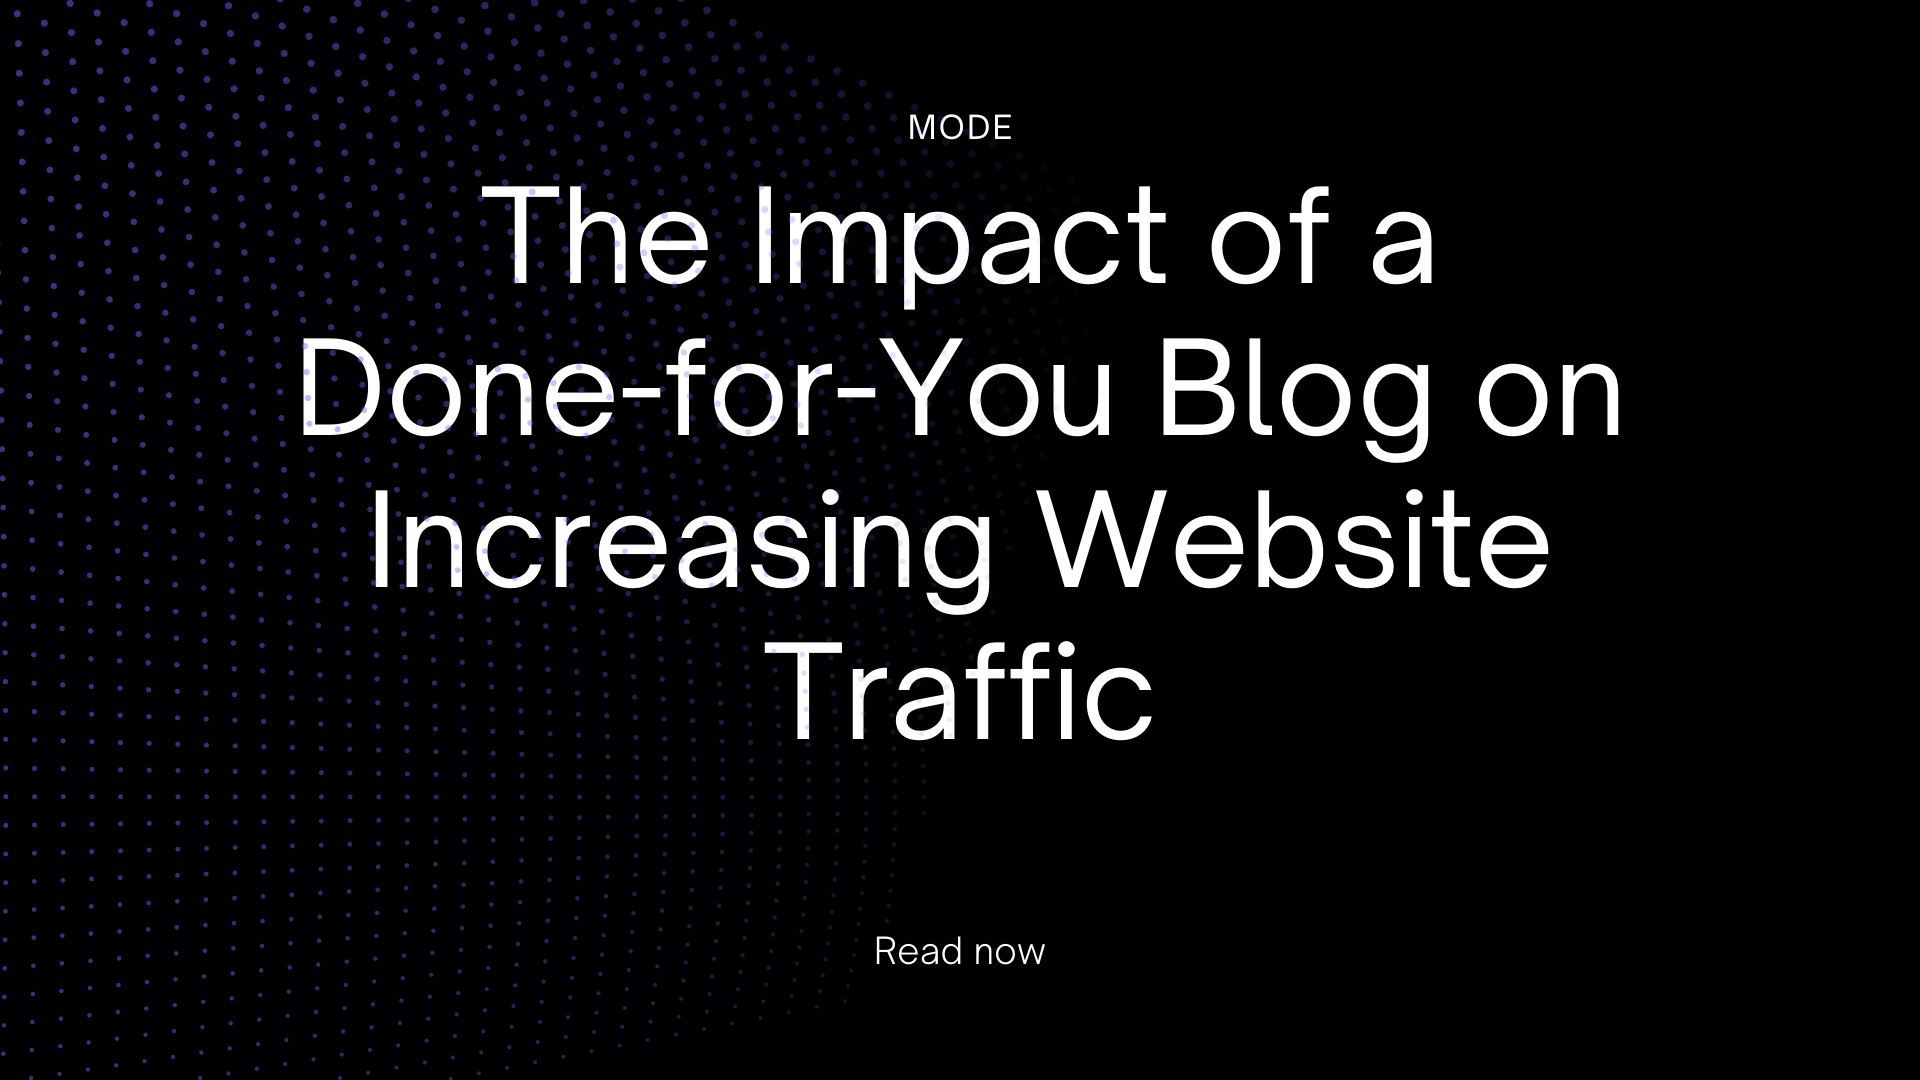 The Impact of a Done-for-You Blog on Increasing Website Traffic